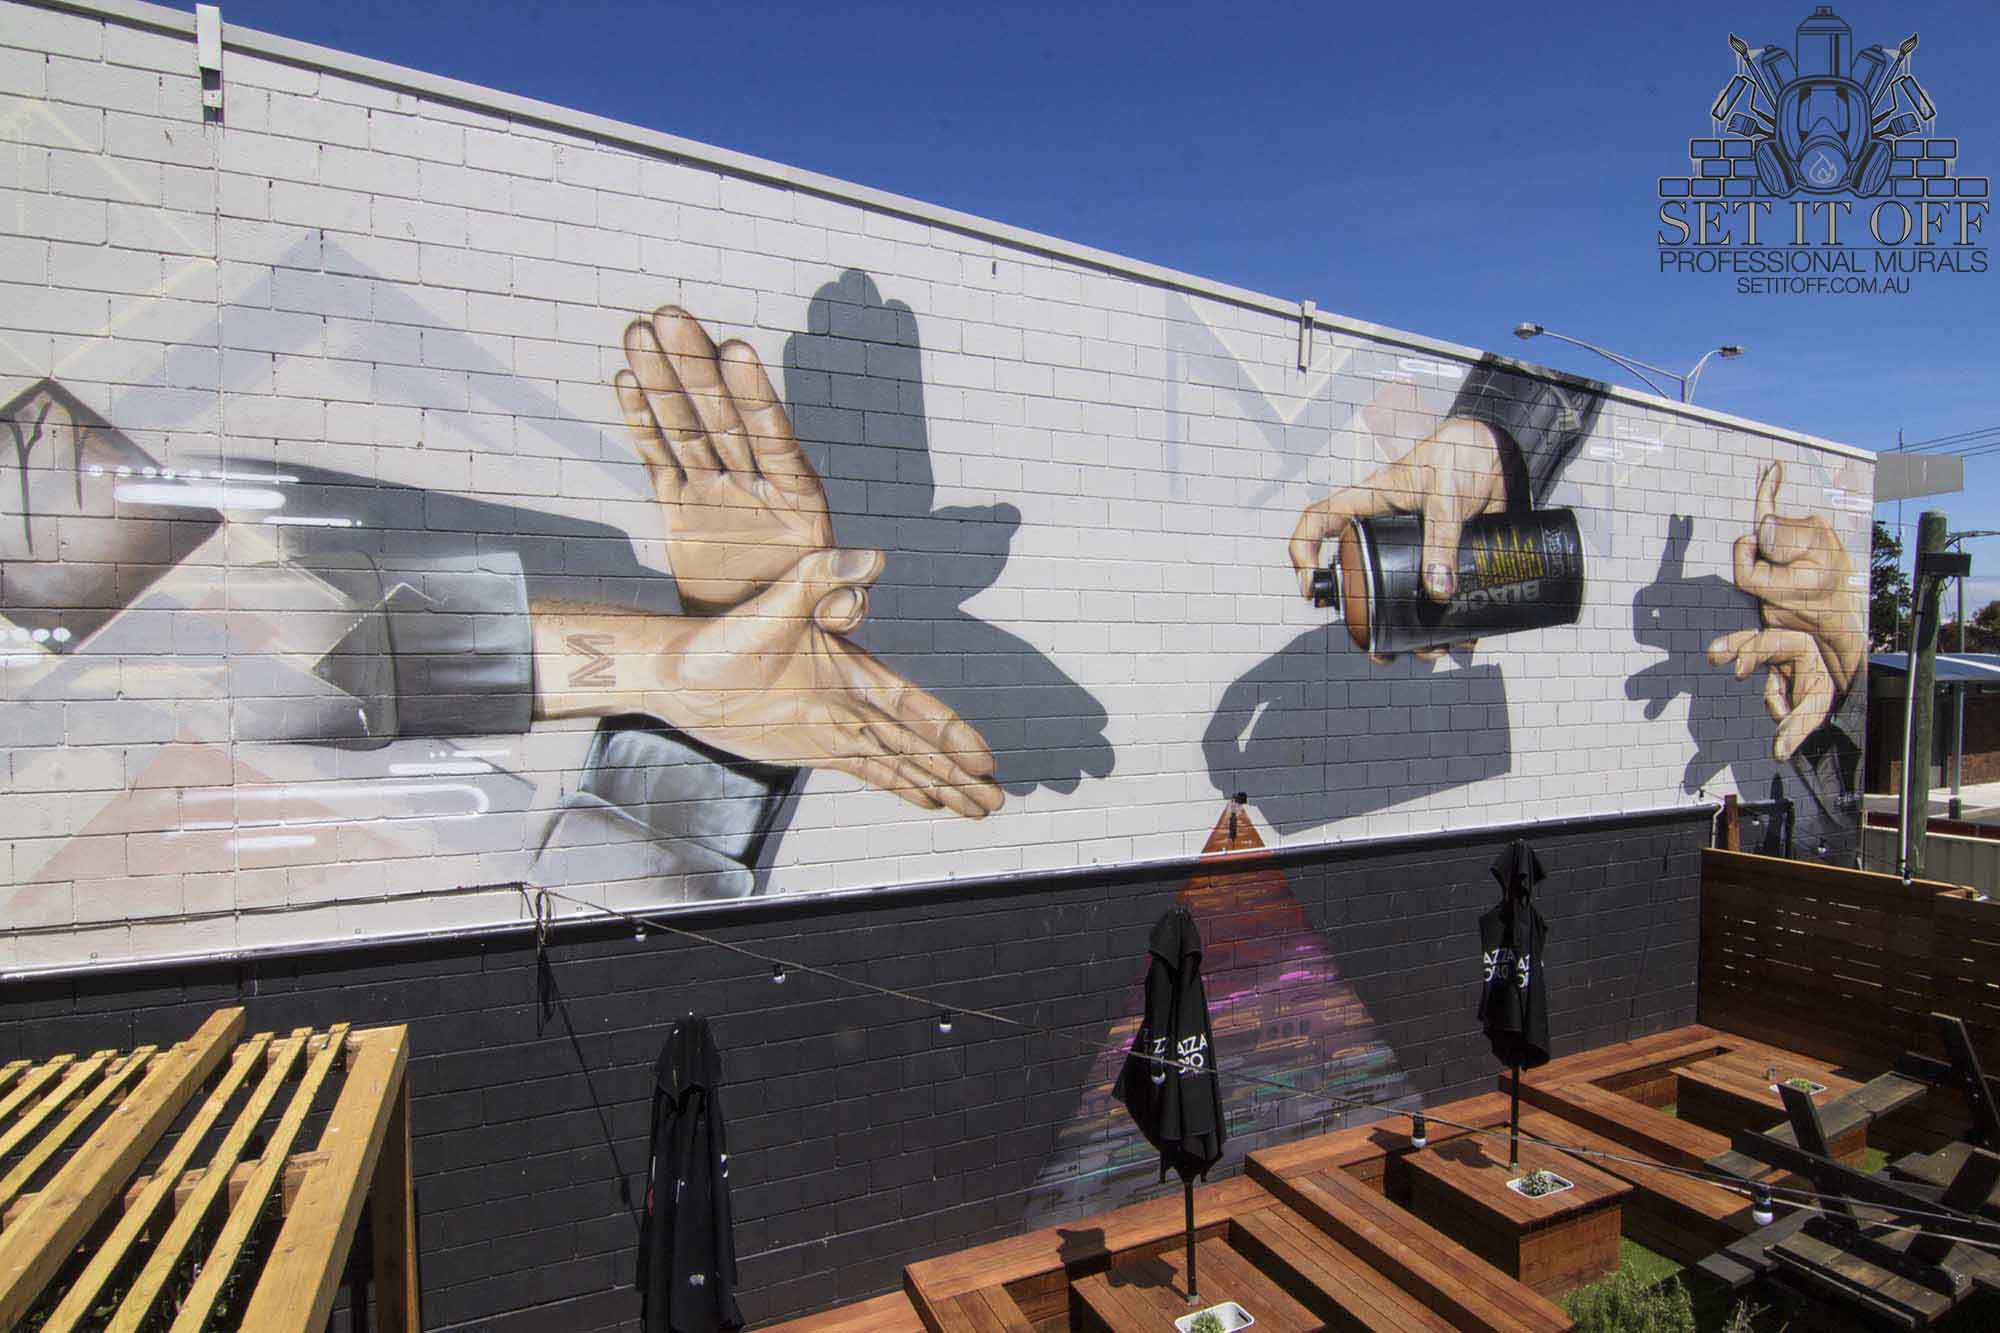 Shadow puppets large-scale photorealistic wall mural for outdoor entertainment area.